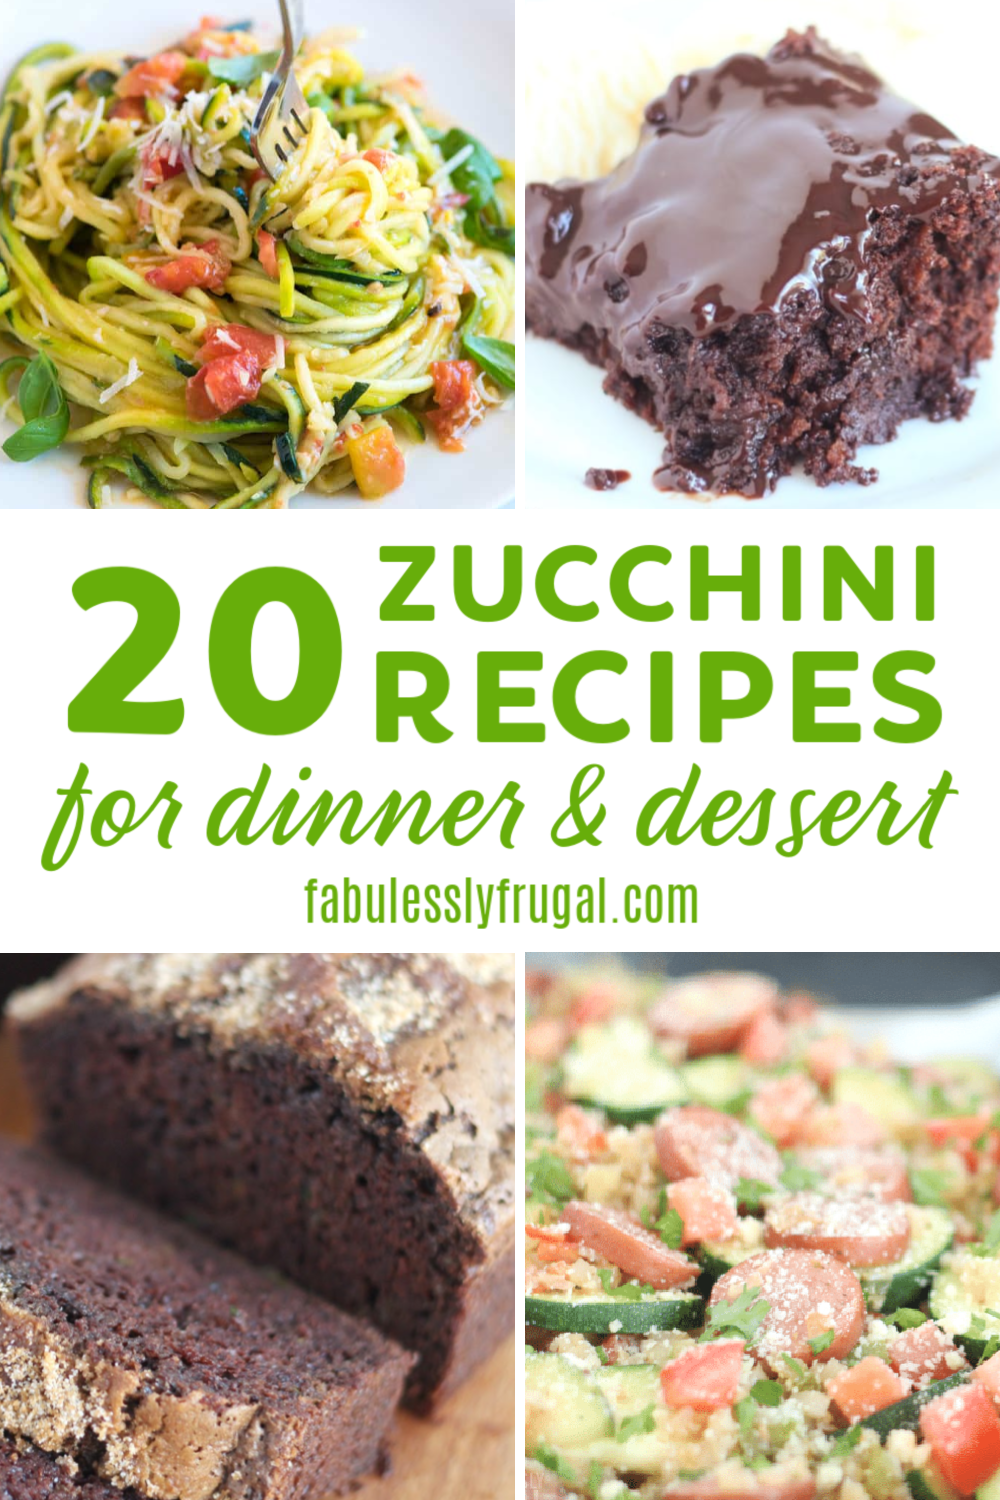 Zucchini recipes for dinner and dessert